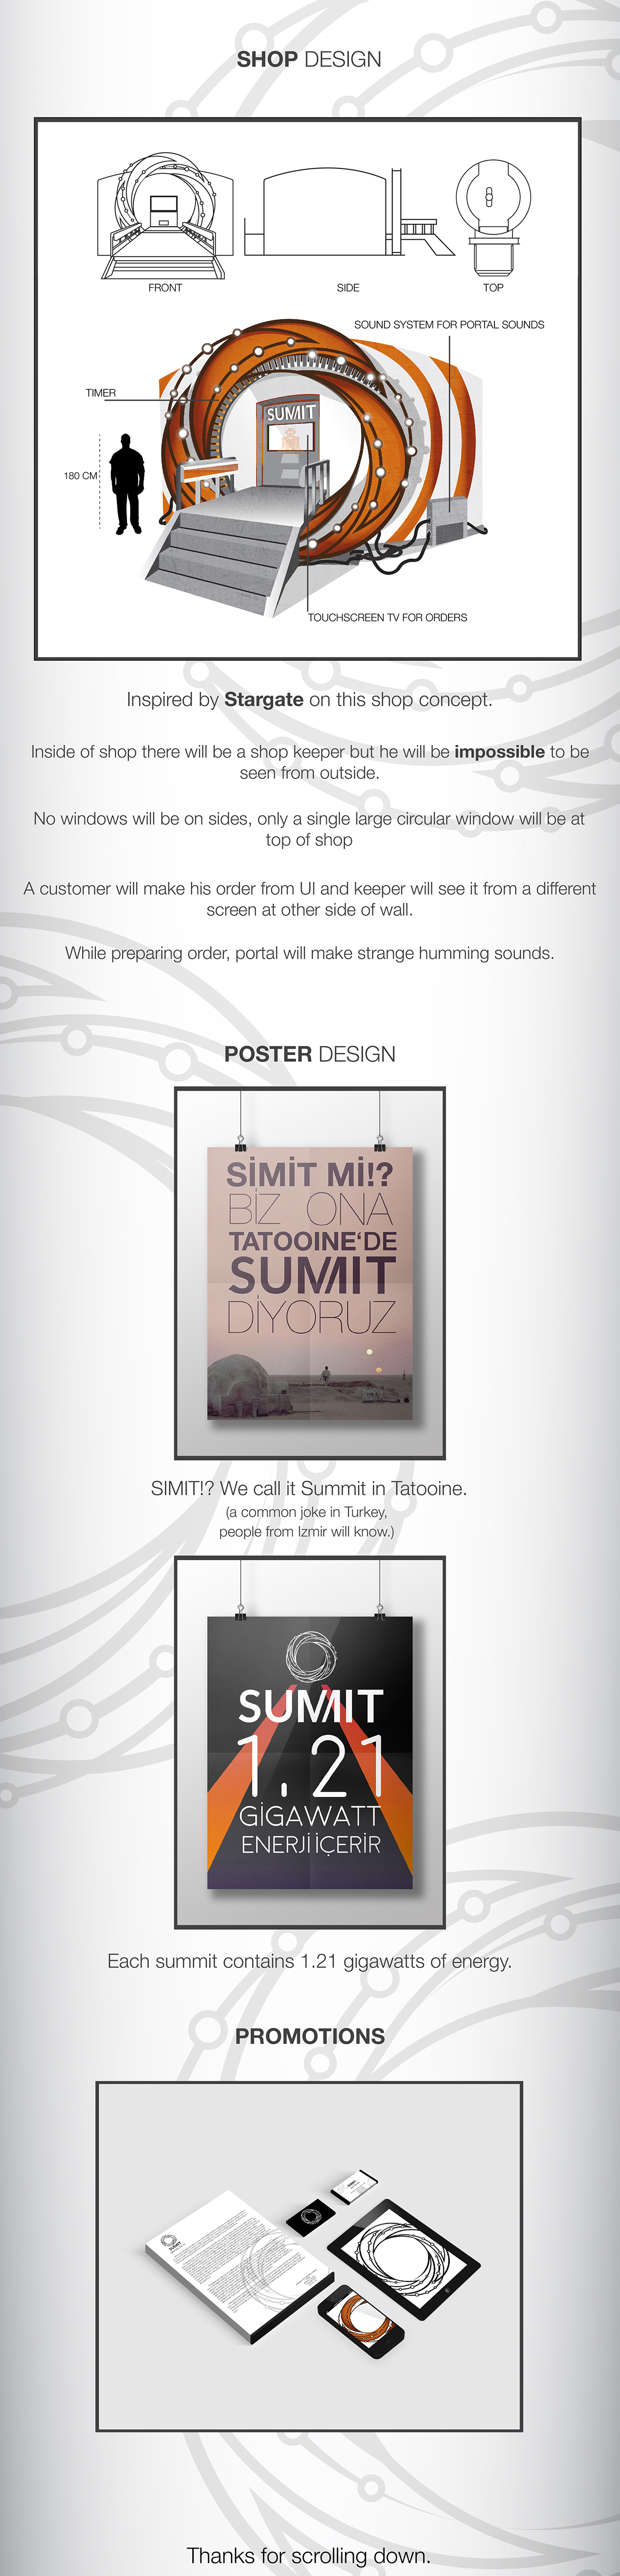 sumit simit summit science fiction identity corporate shop graphic industrial